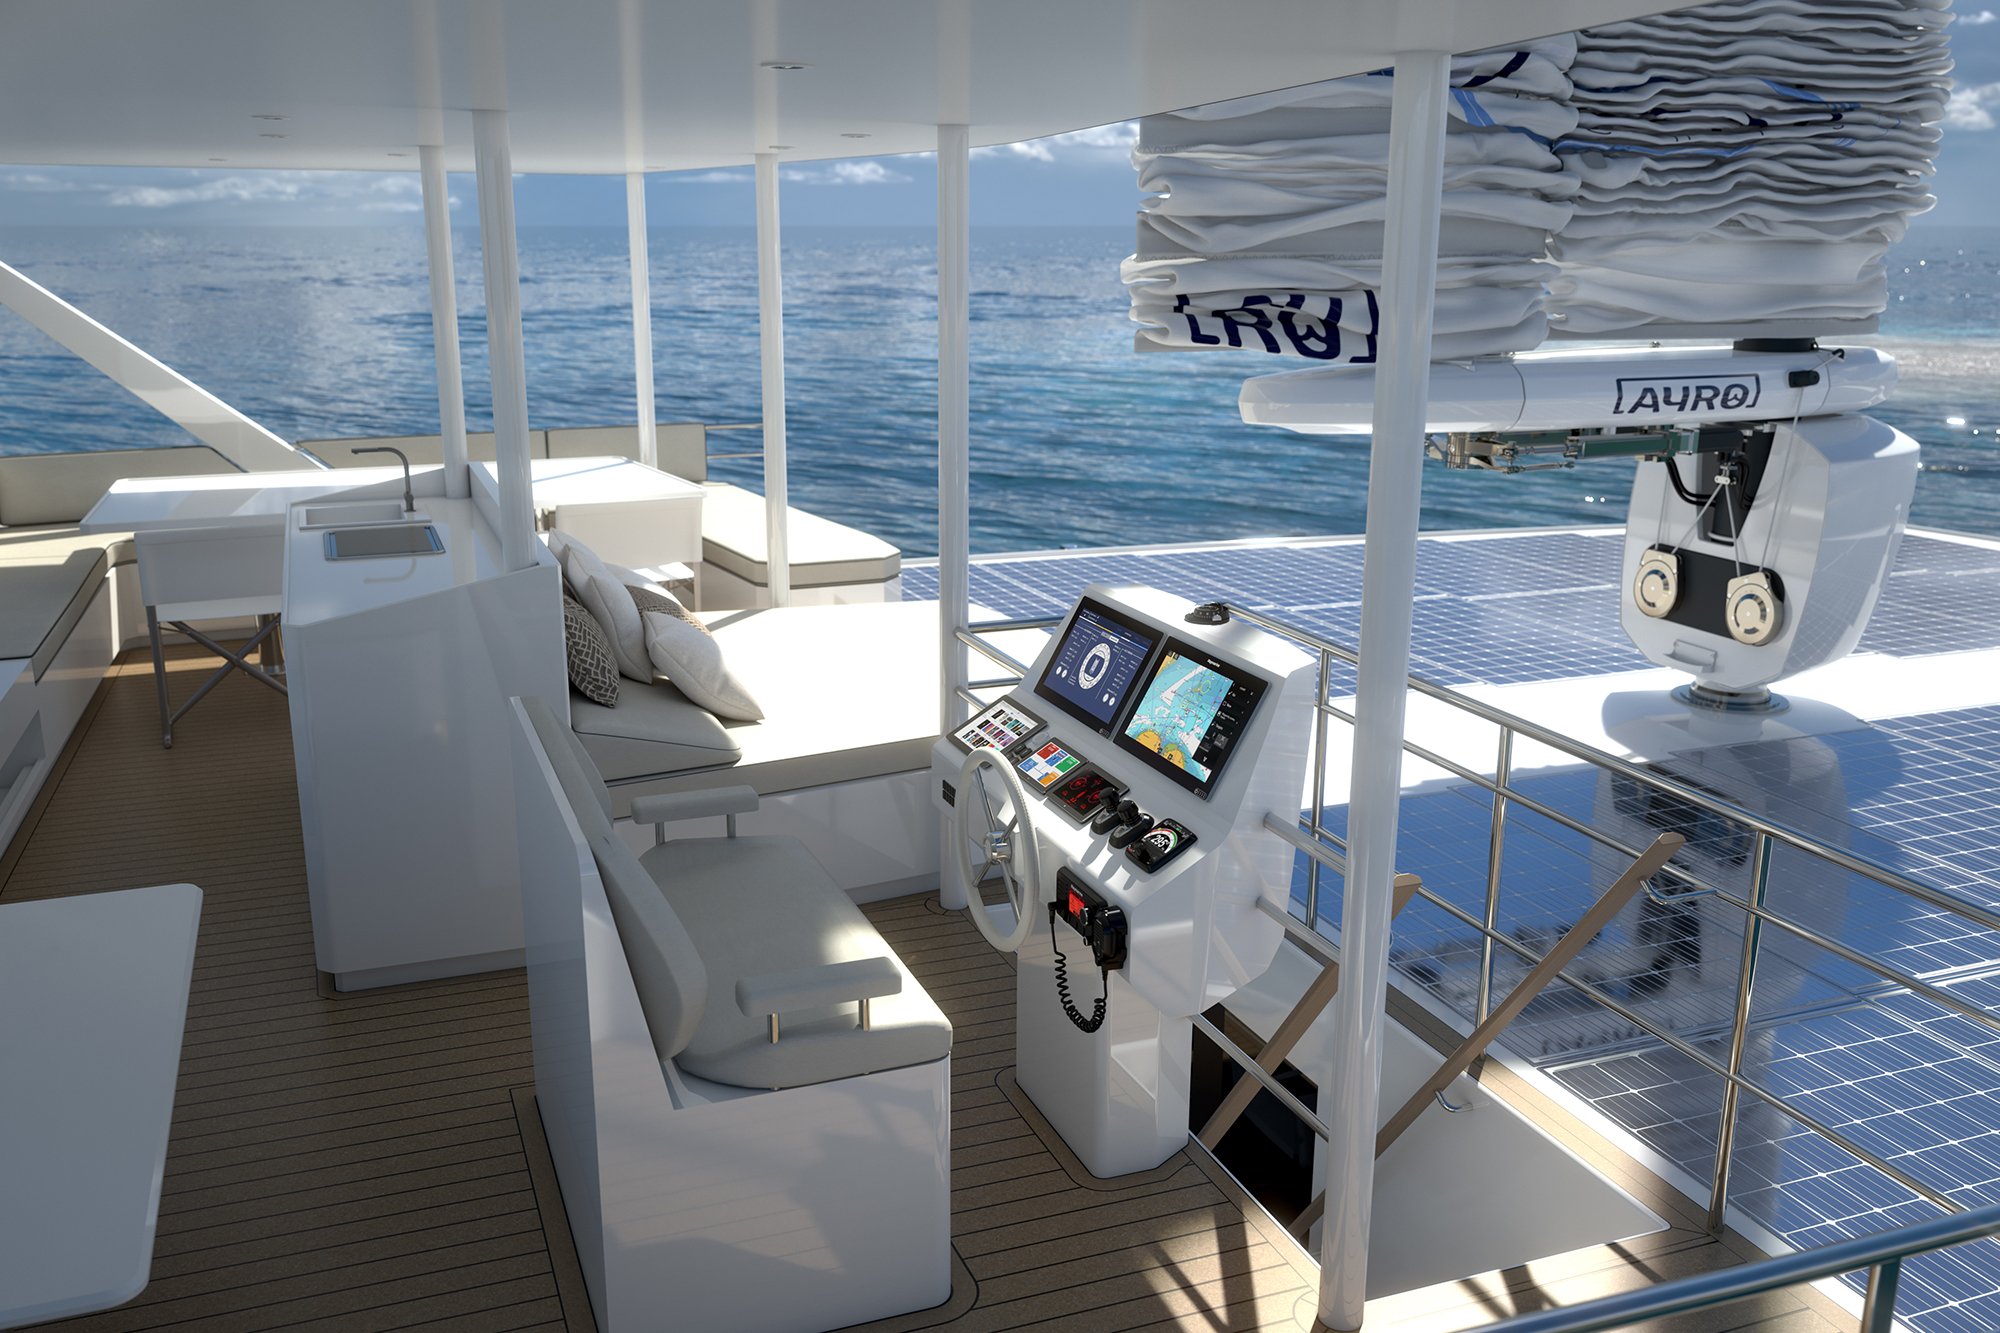 The design of the solar-powered ZEN50 Catamaran featuring an automated wingsail